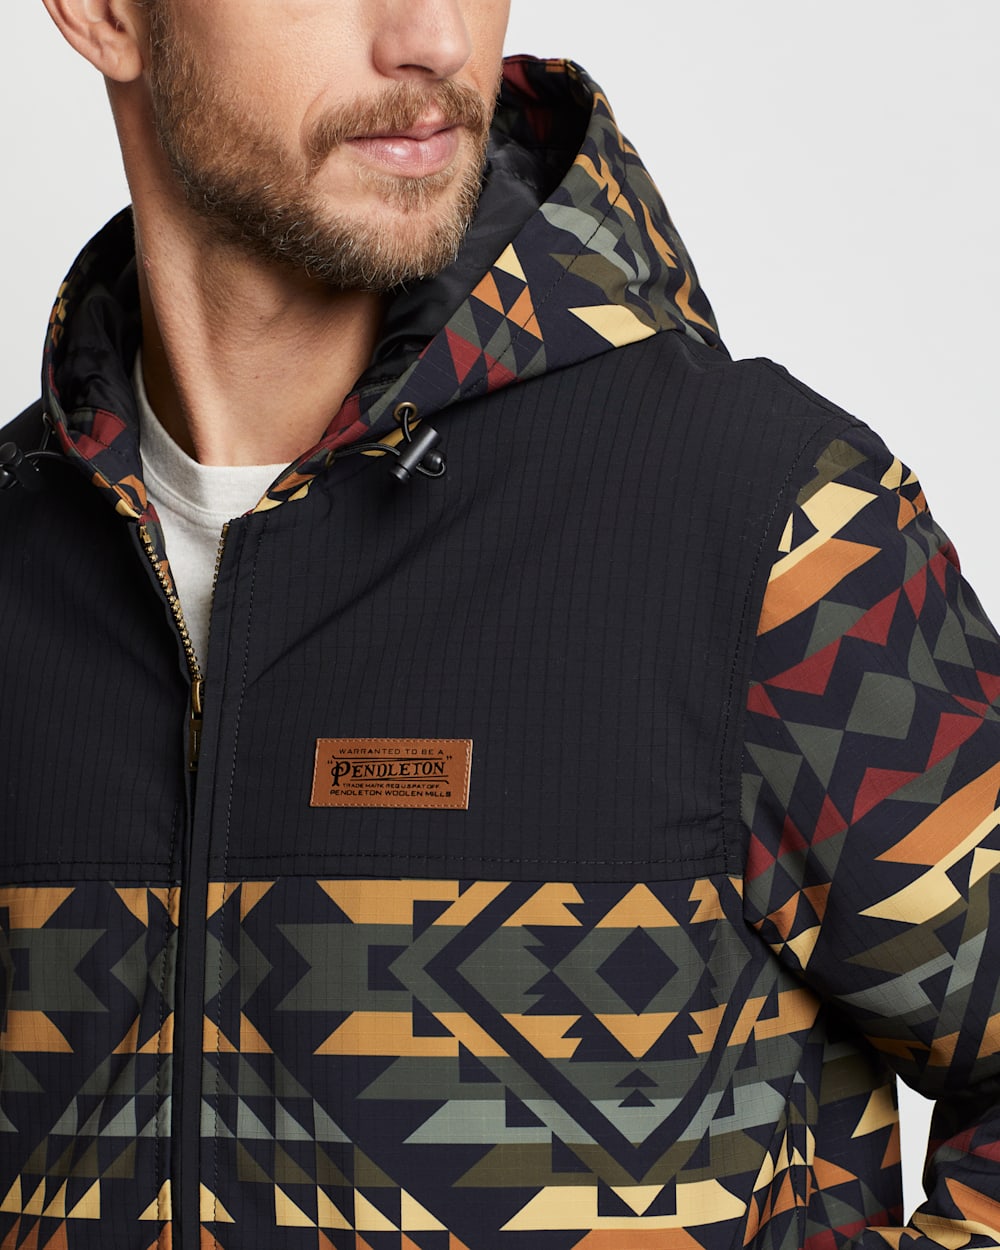 ALTERNATE VIEW OF MEN'S BOW PASS HOODED JACKET IN BLACK SMITH ROCK image number 2